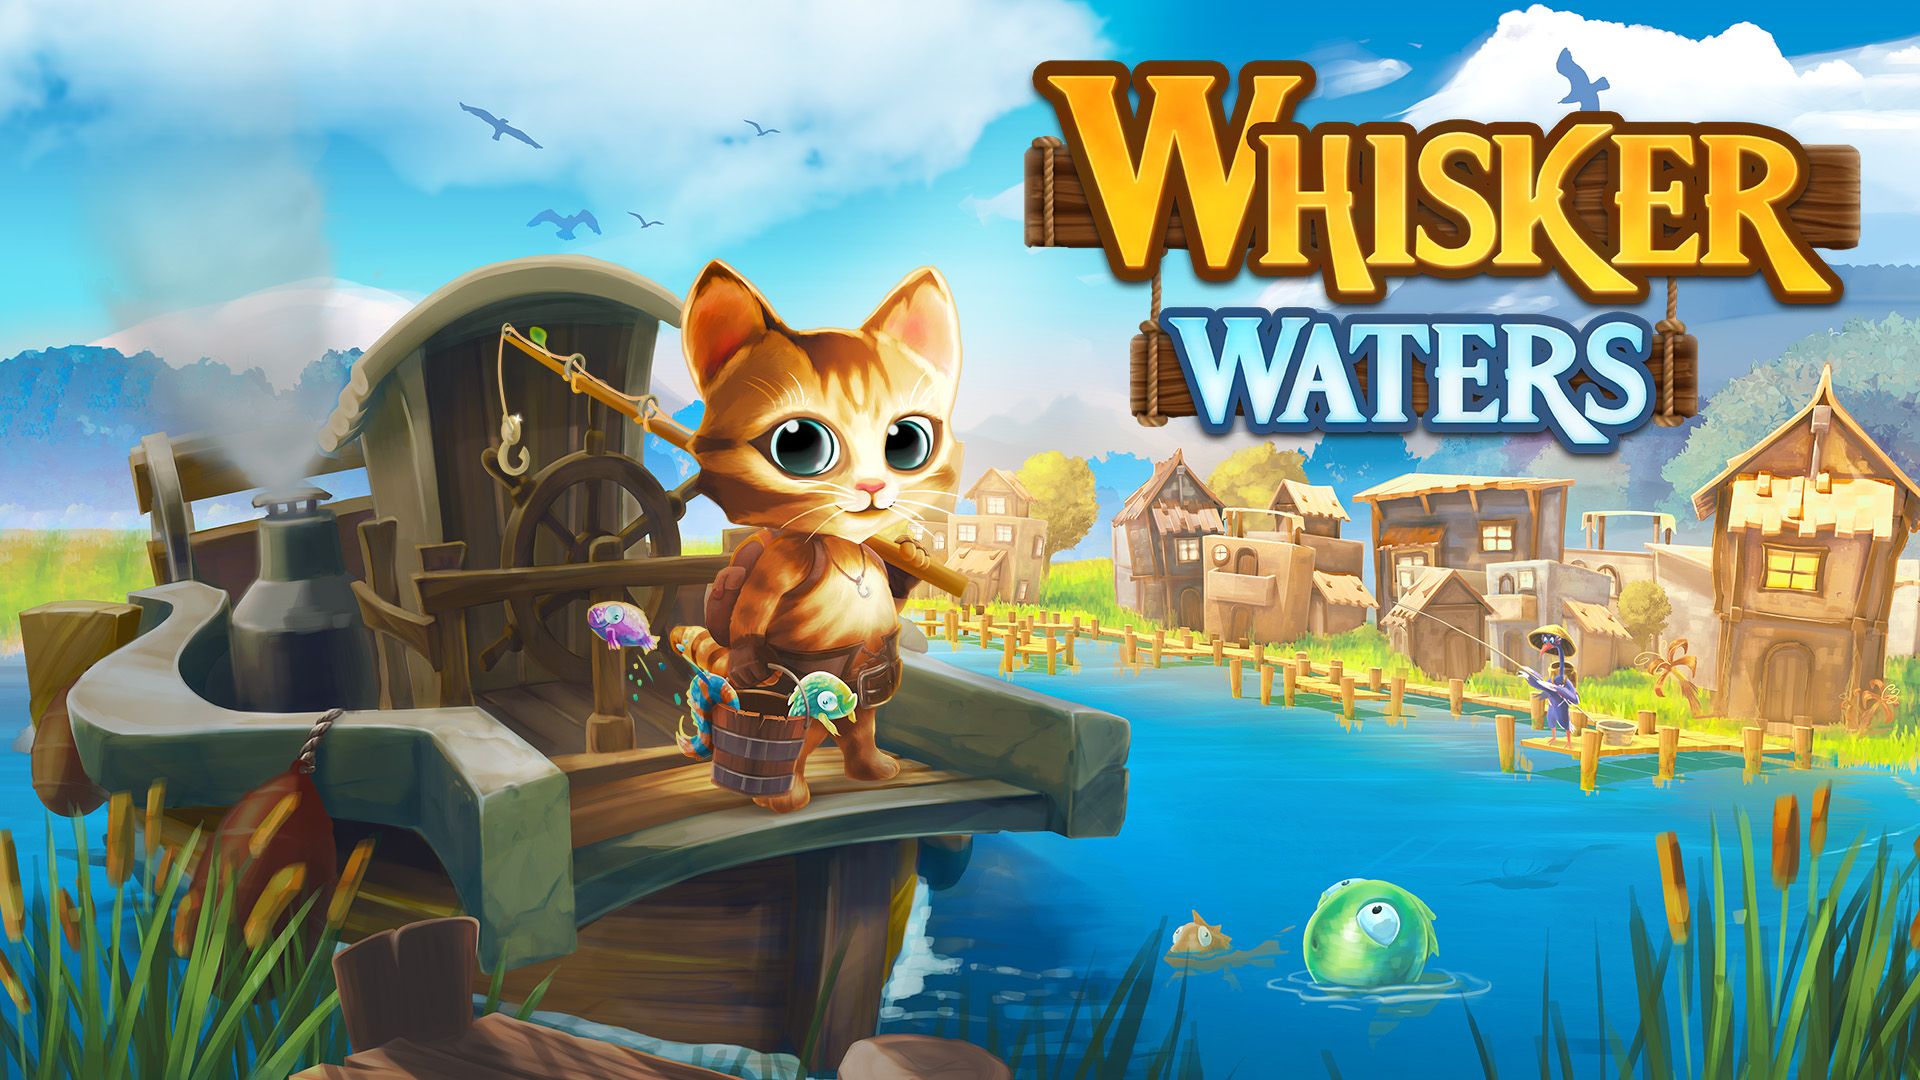 Announcing Whisker Waters! For Pc and Console